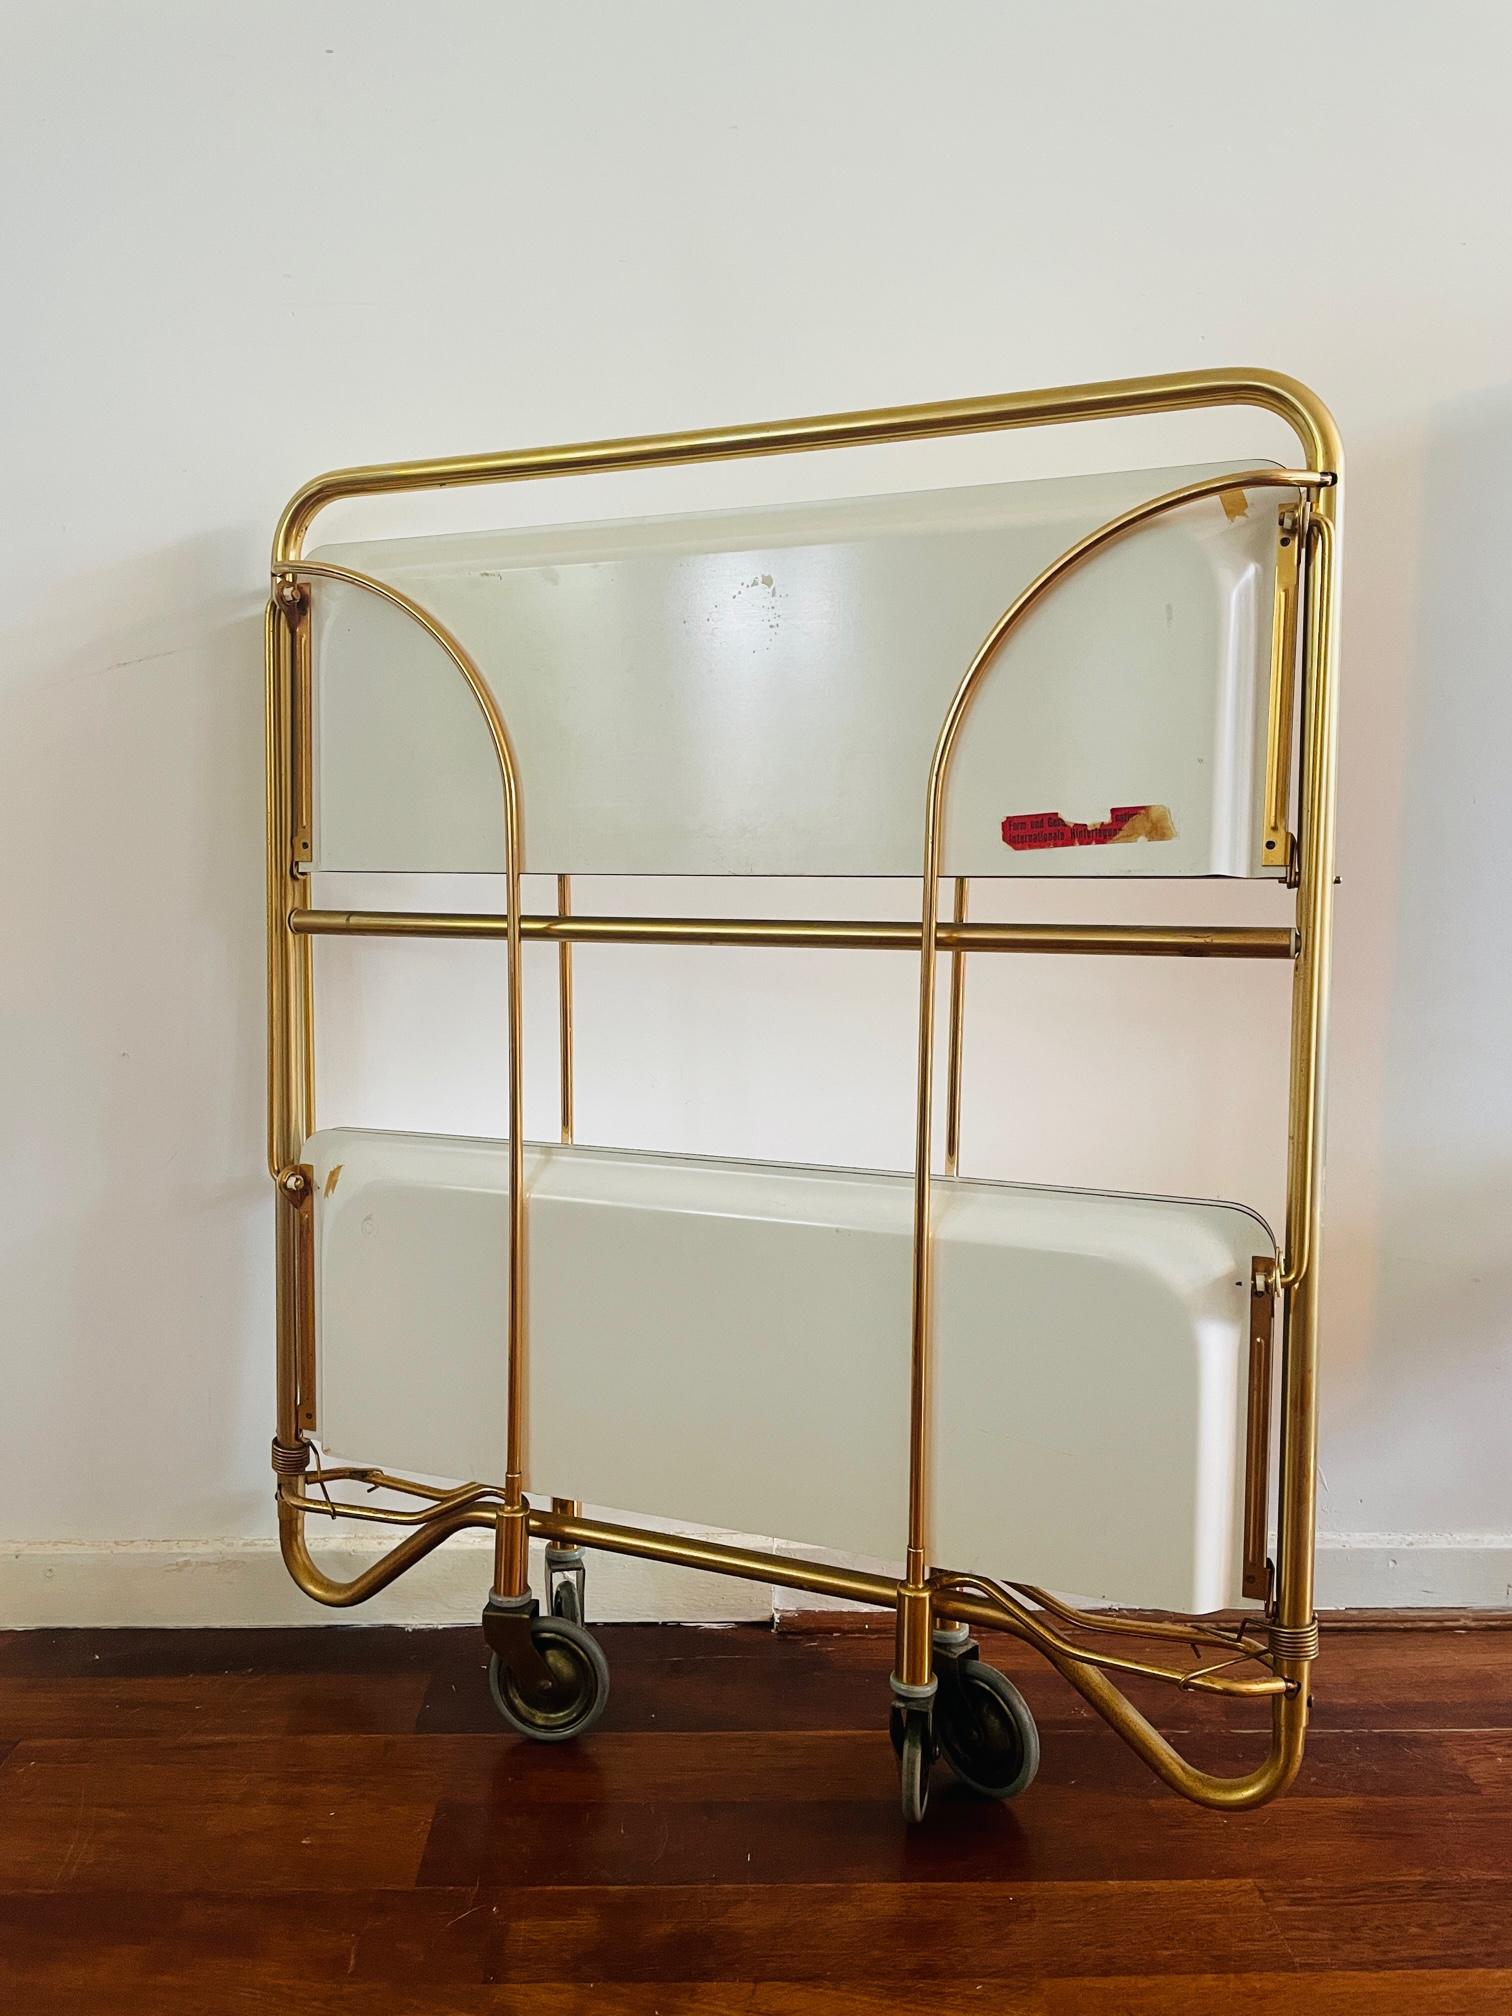 Mobile bar, manufactured by Bremshey & Co in Germany, 1960s,
It is characterized by a synthetic form, application (after assembling one part it can be used as, for example, a shelf)
This brass version of the Bremshey serving card in combination with